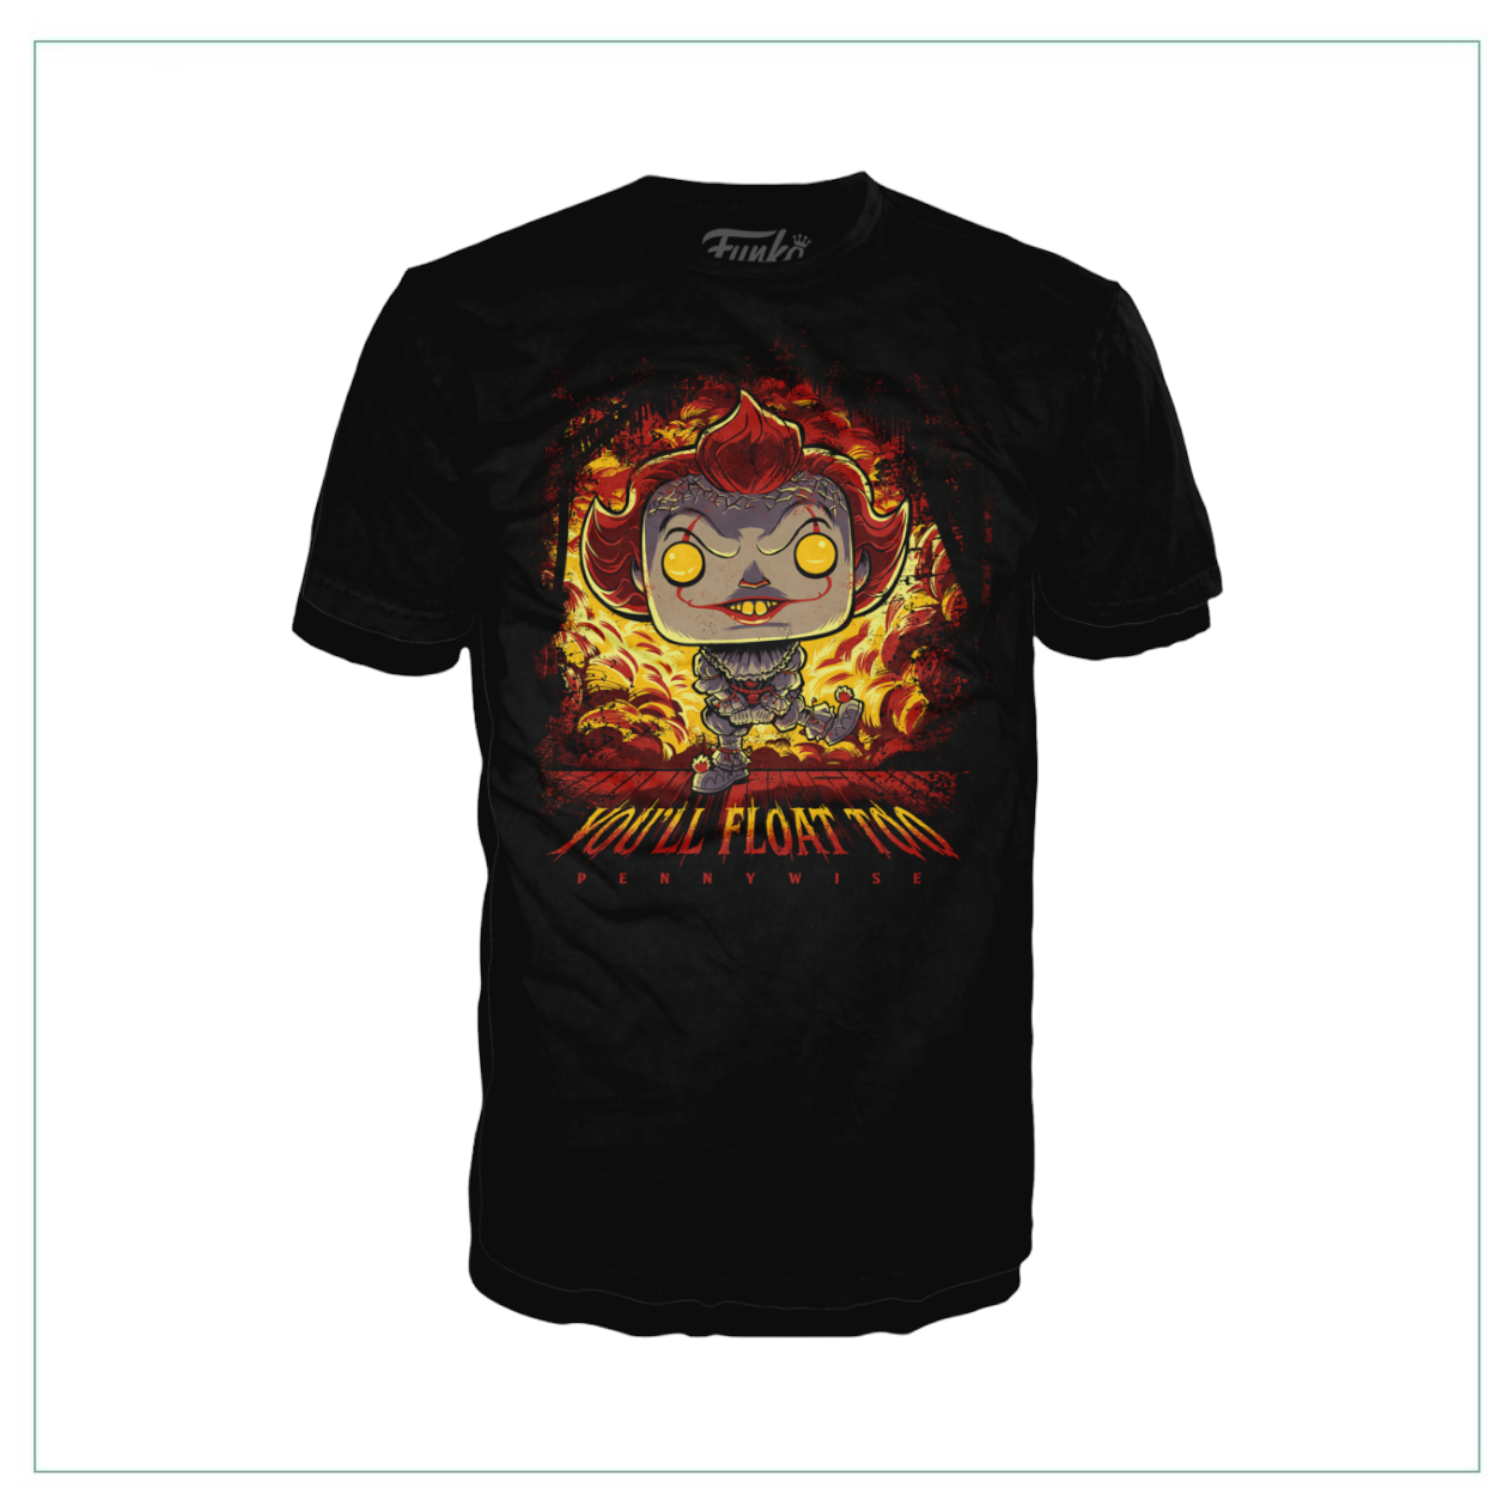 Pennywise Flame Funko Tee! IT